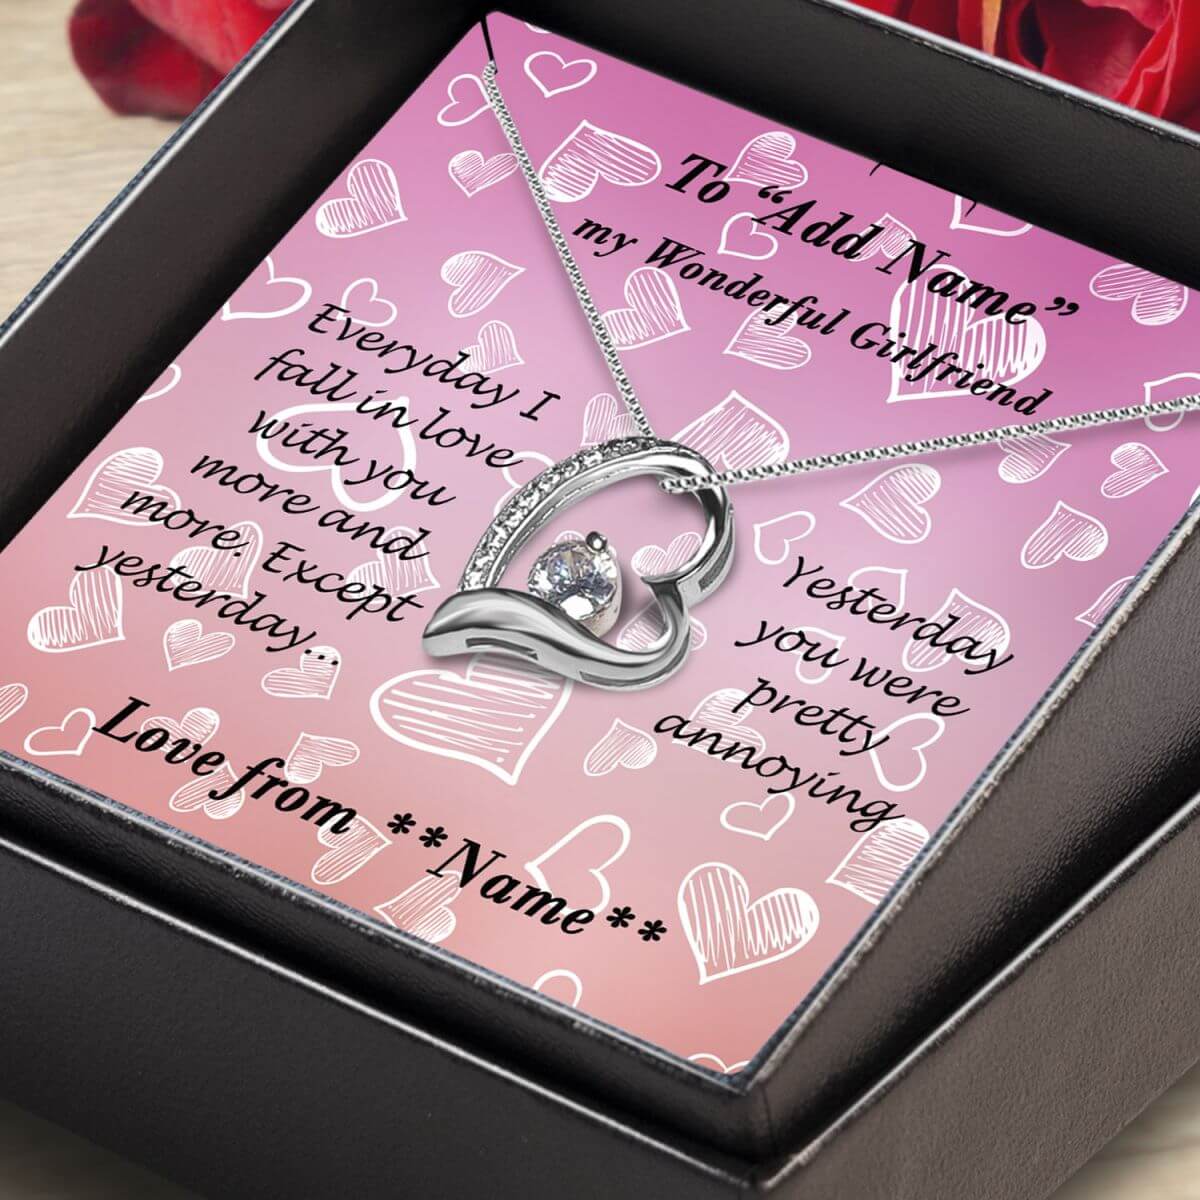 Necklace-Box-angled-close-up-Eternal-Heart-Wonderful-Girlfriend-personalised-BIG-ON-Jewellery-BIG-ON-Necklaces